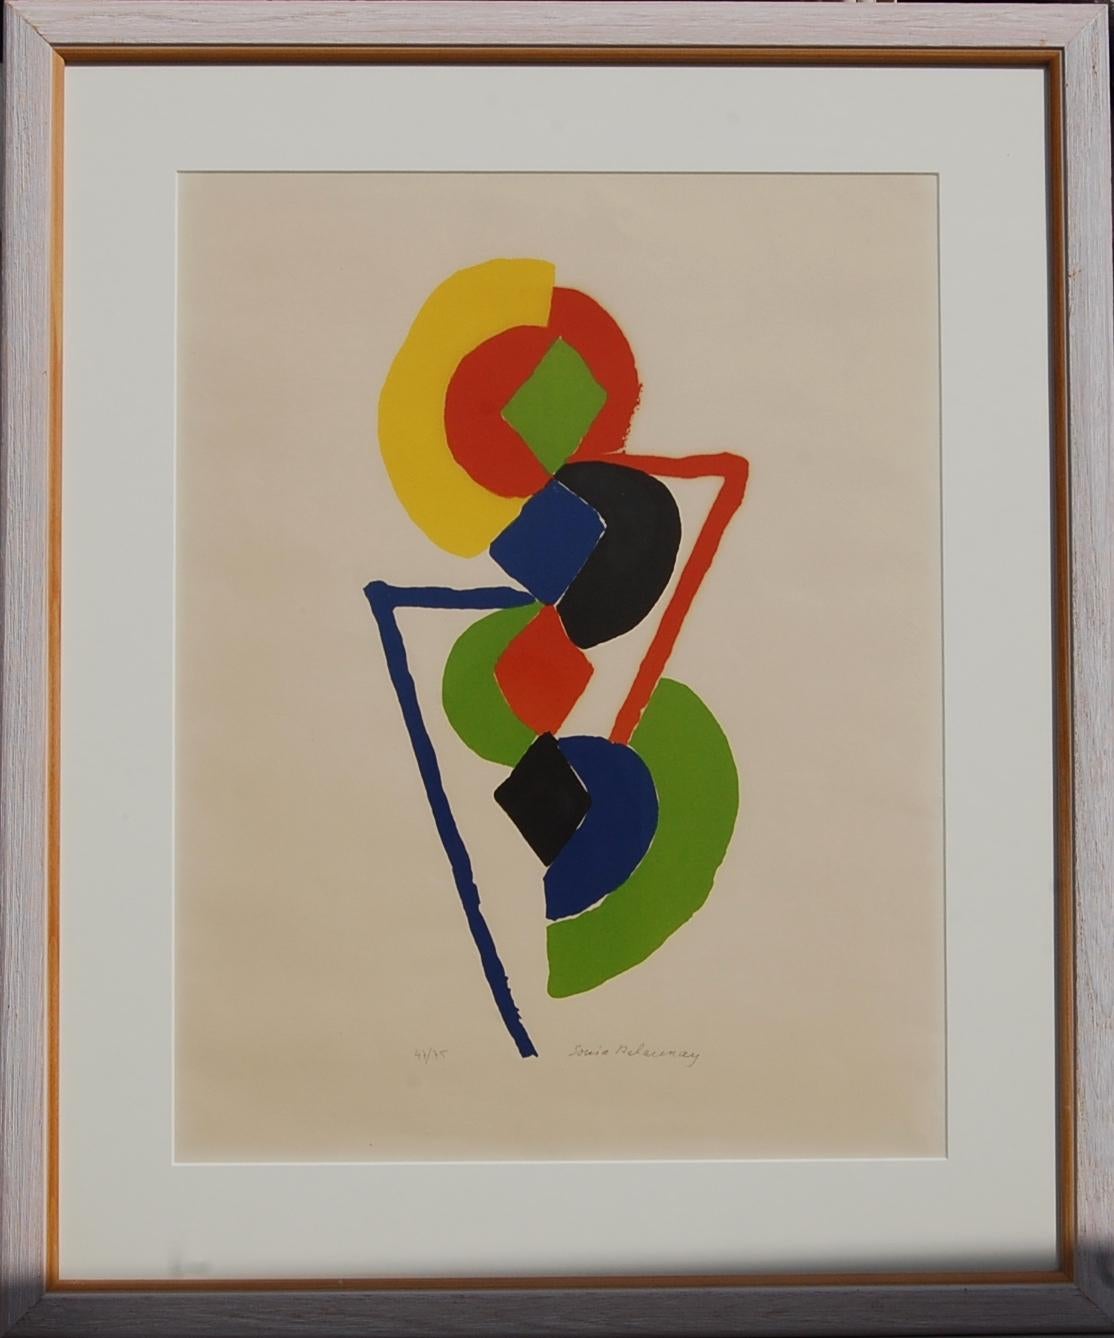 SoniA Delaunay color limited edition lithograph, pencil signed.
 size: 24.5x19 framed,  framed under glass, 33 × 28 × 1 in
Limited edition lithograph 47/75
Sonia Delaunay’s innovative explorations of color and form began with a quilt she made for